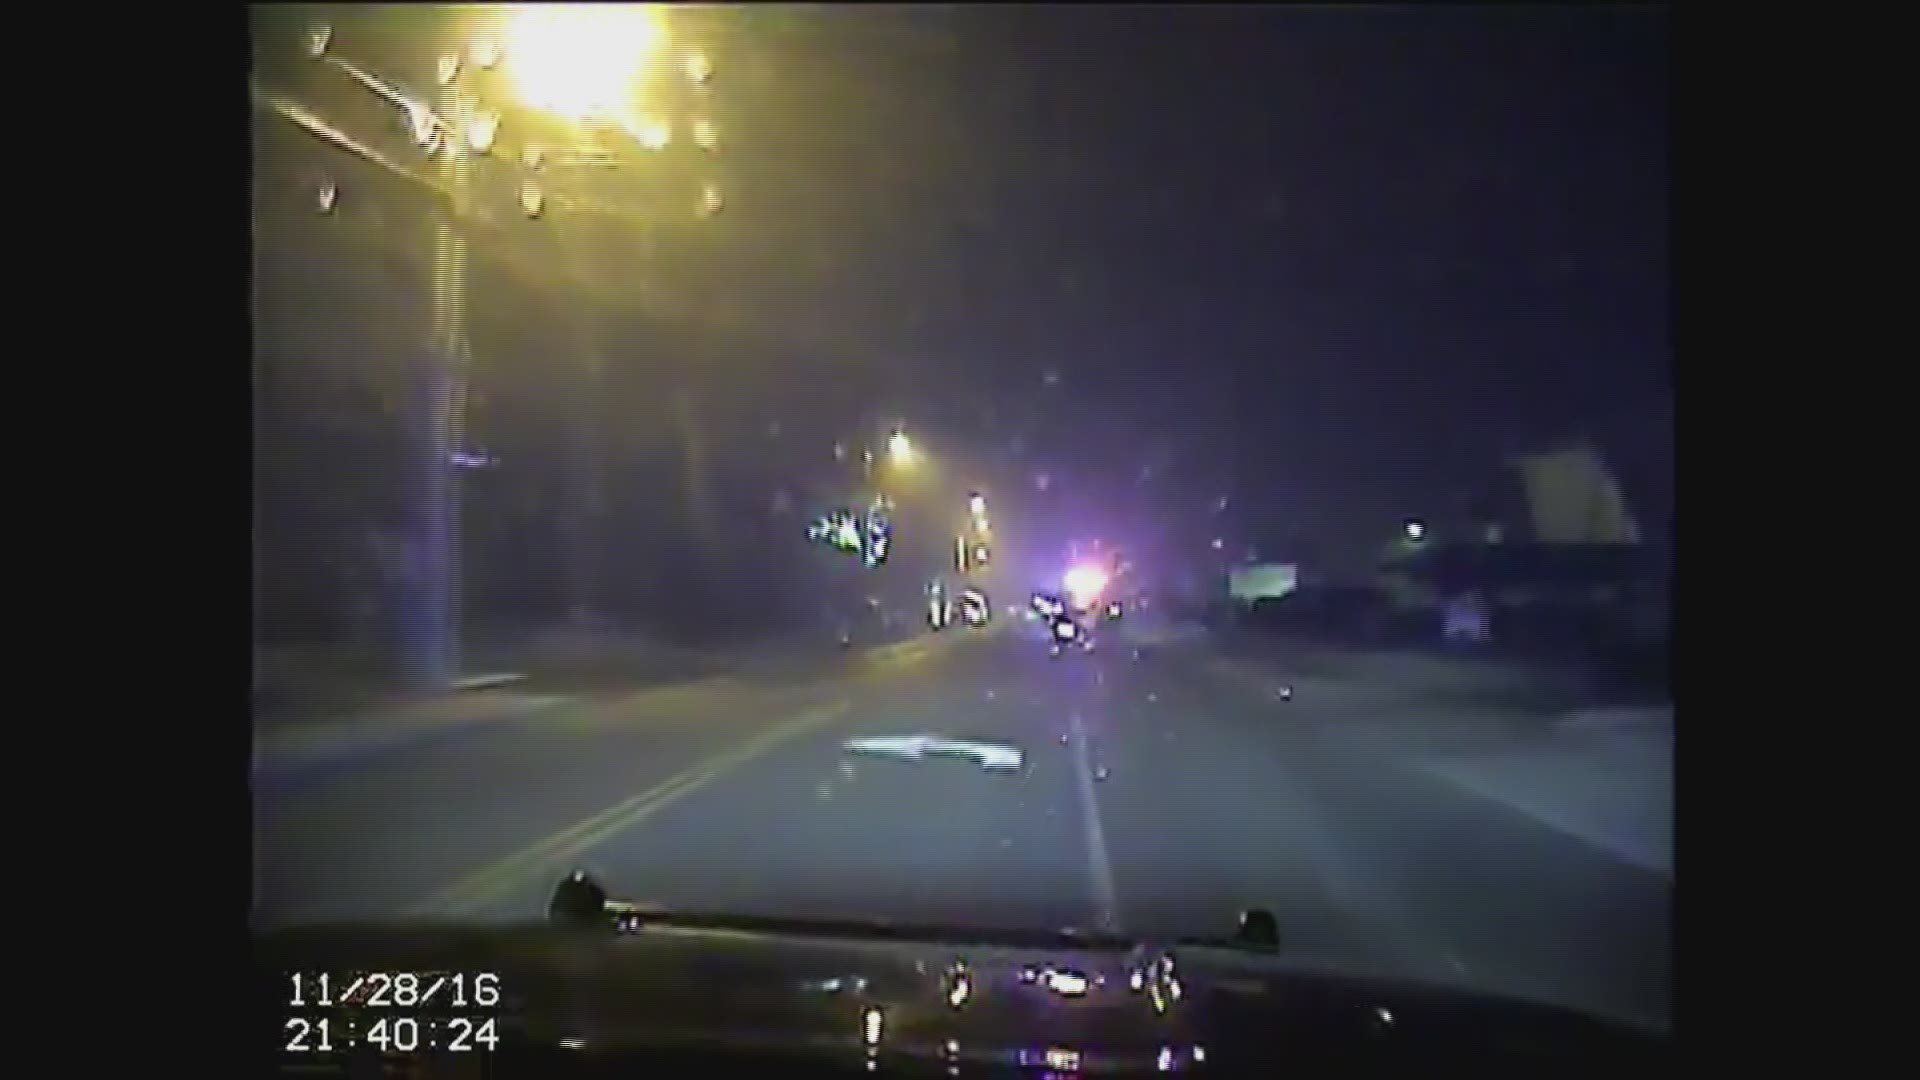 Dashcam video from the Sevierville Police Department shows what officers and other emergency responders saw on the night of Nov. 28, 2016 as fire swept through parts of Sevier County.